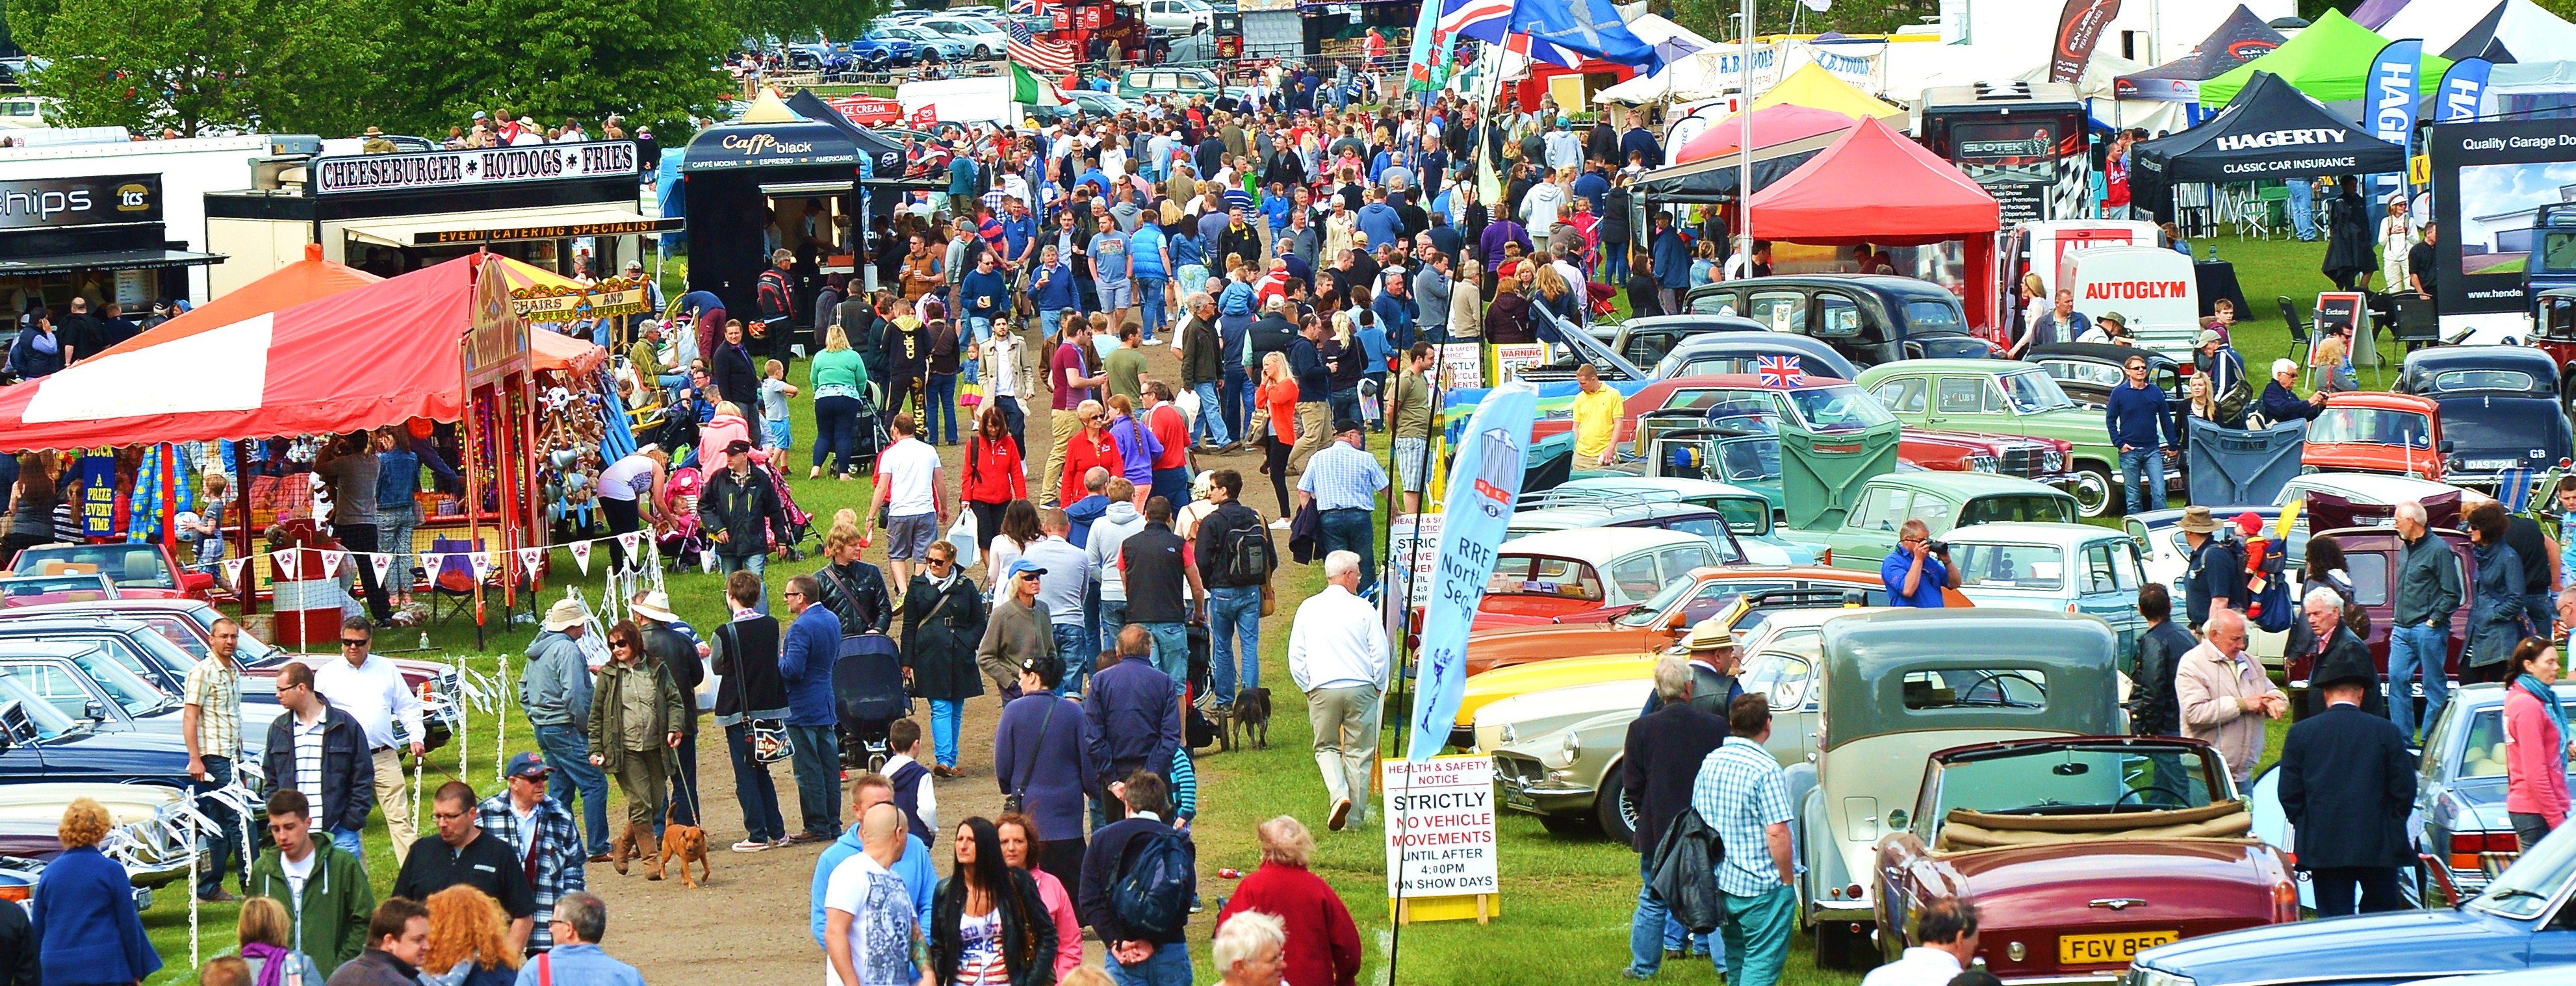 The Classic Car Show Crowds